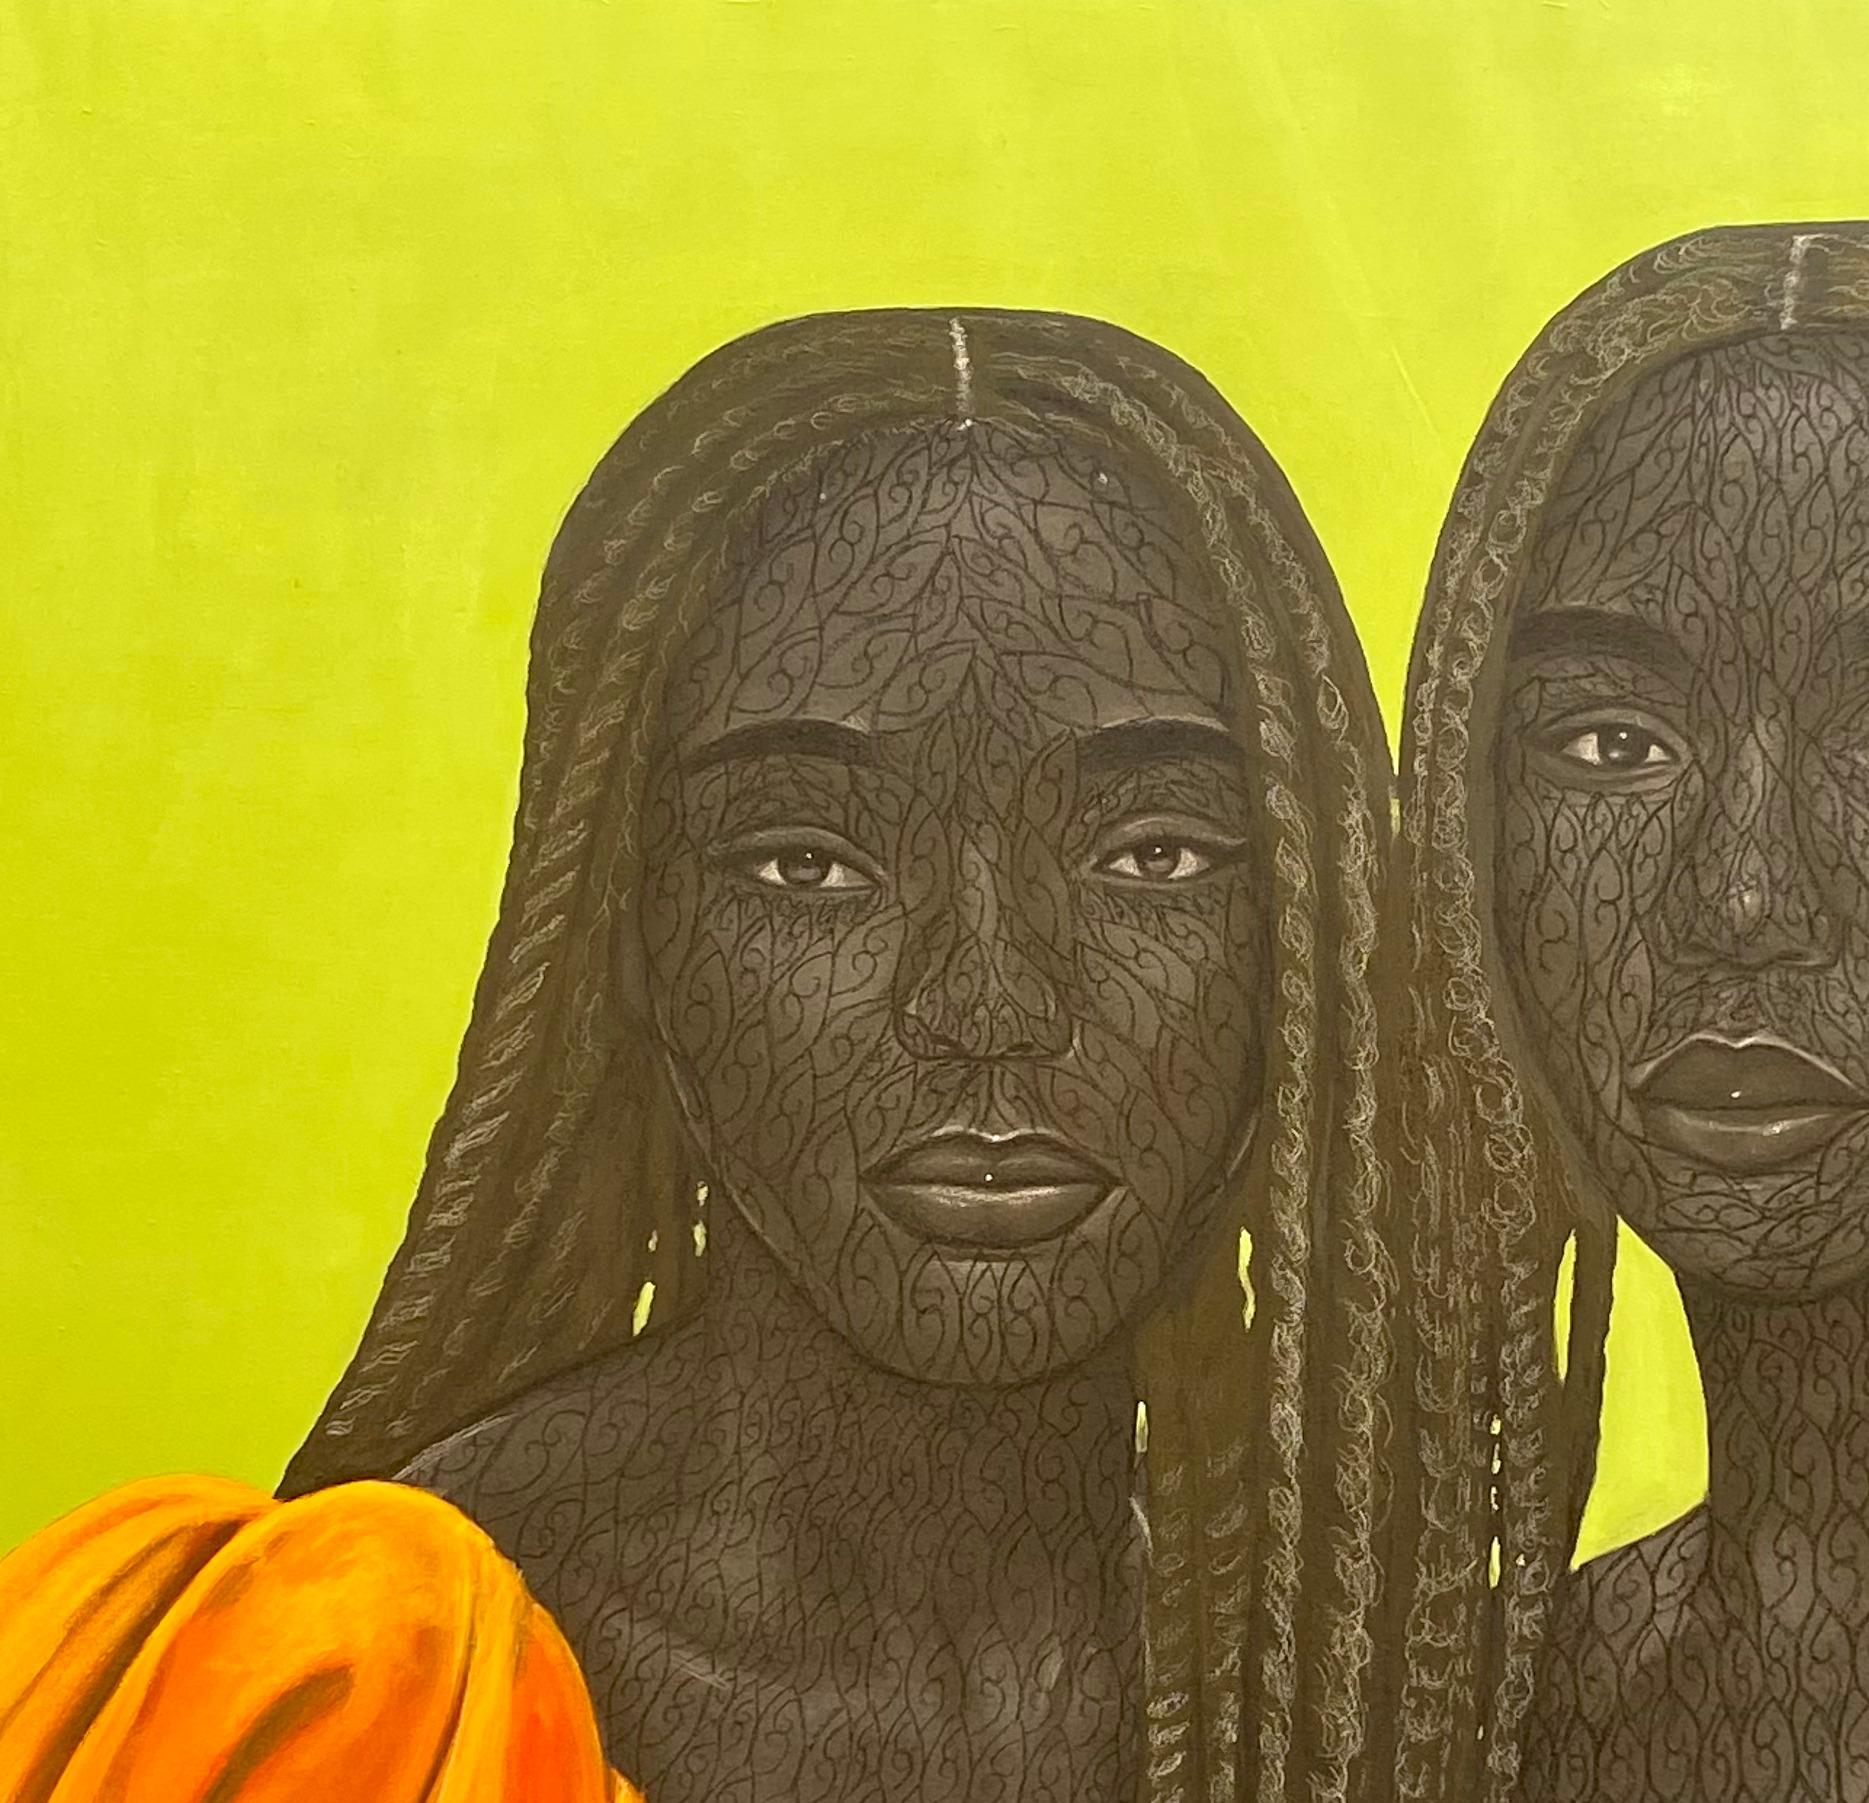 We Grow When We Know Love - Contemporary Mixed Media Art by Taiwo Odejinmi